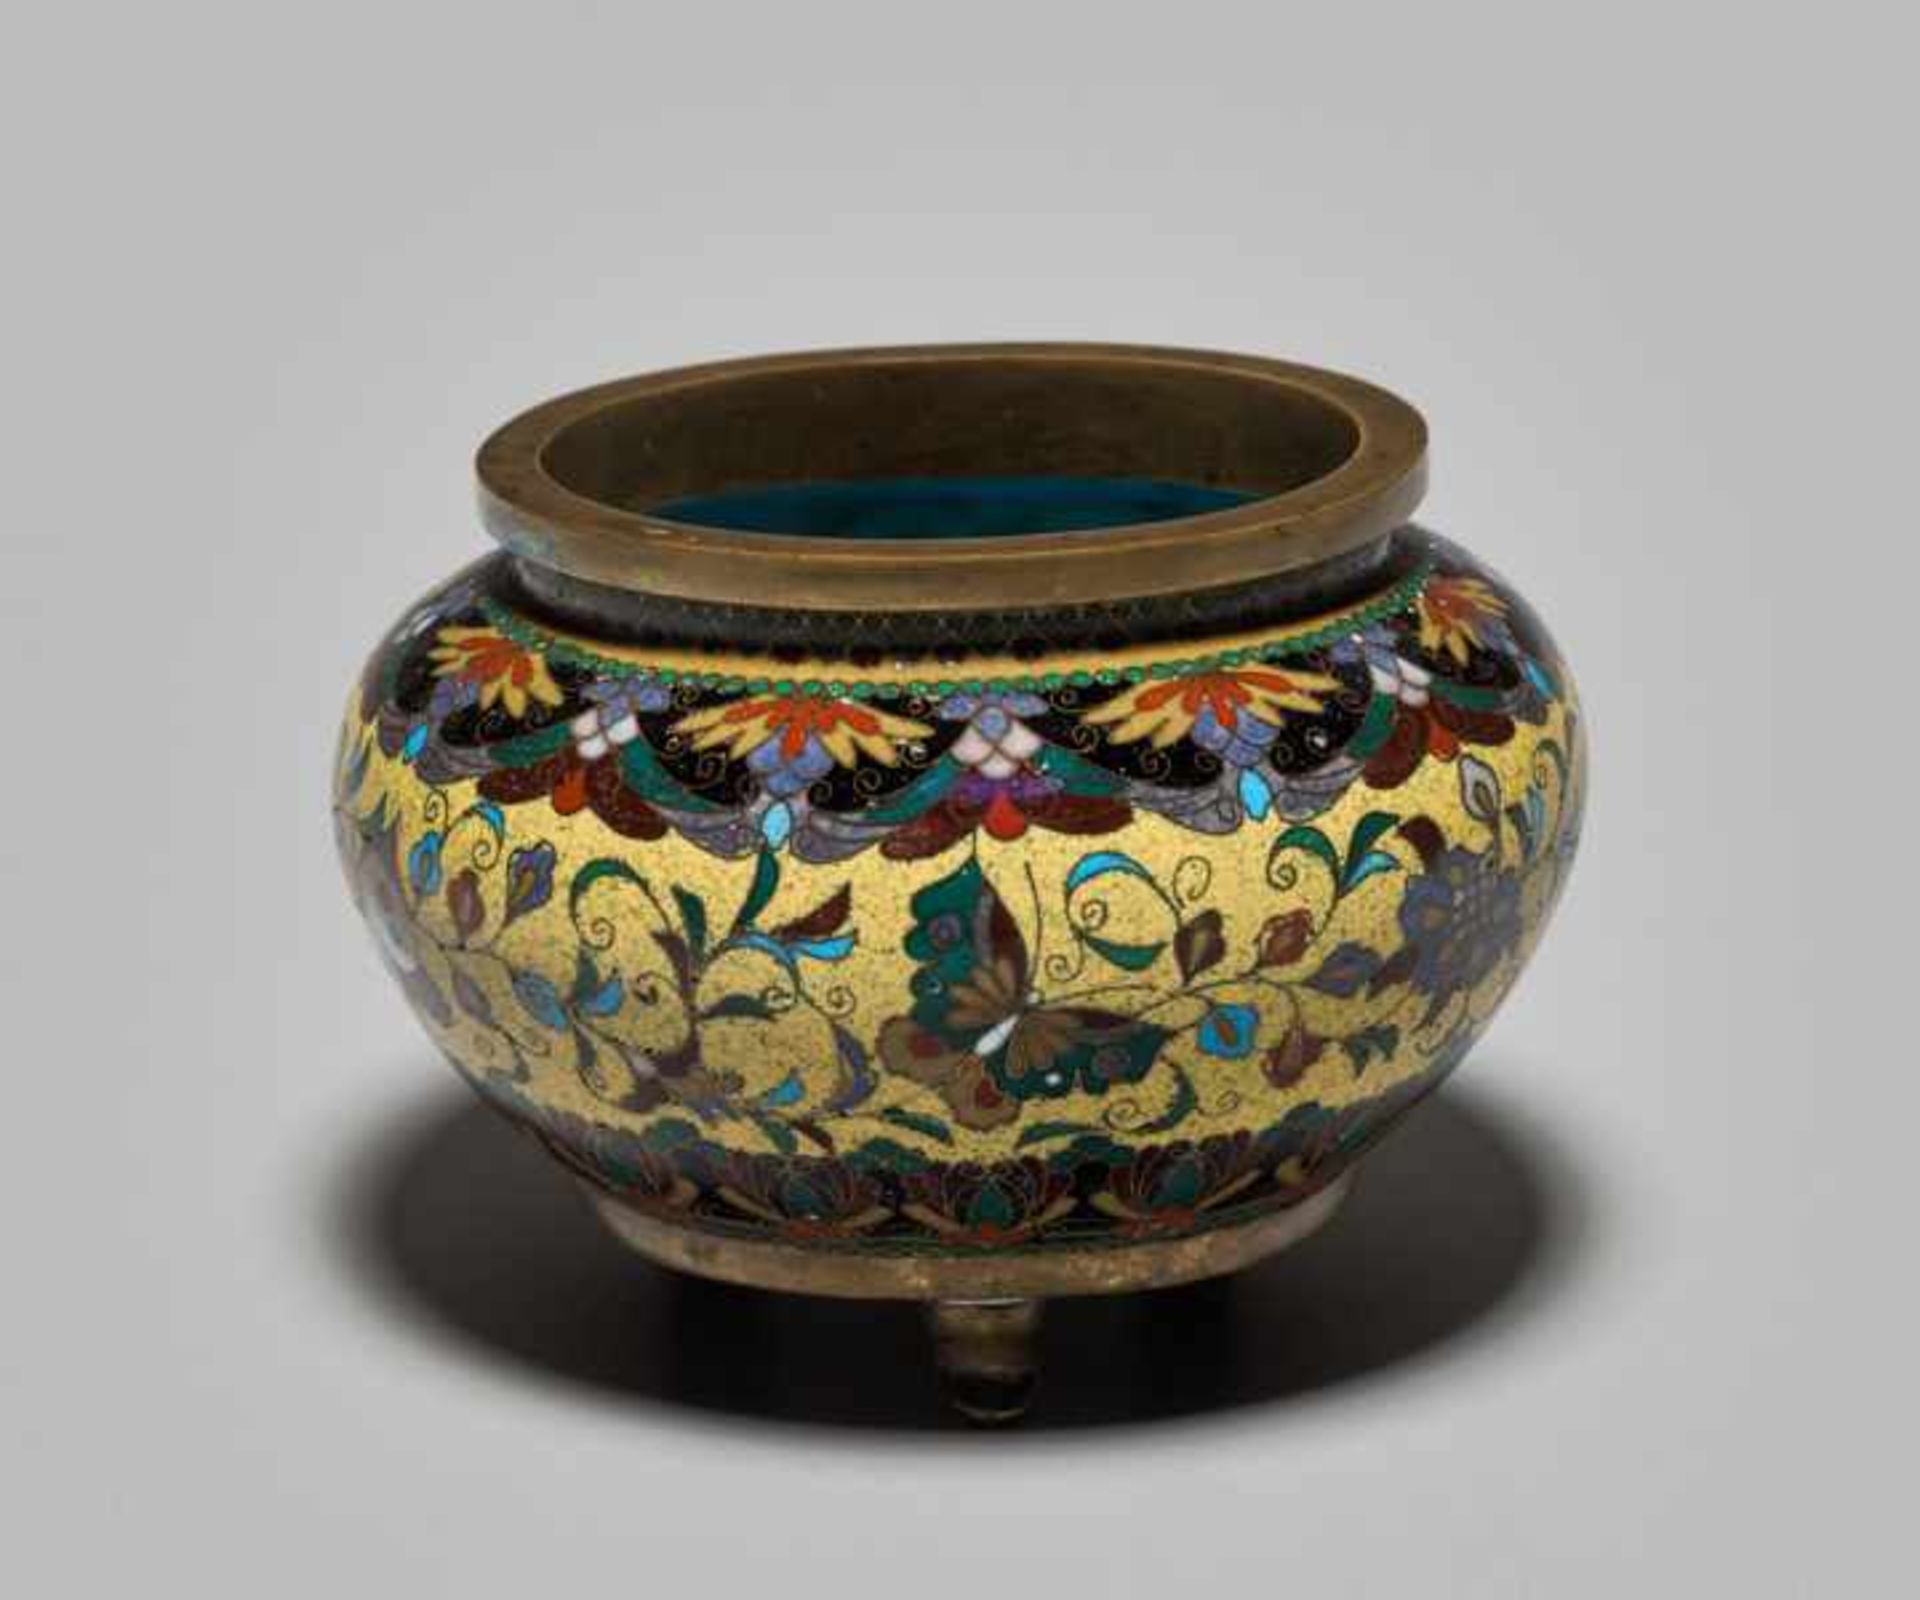 A CLOISONNÉ KORO WITH BLOSSOMS AND BUTTERFLIES IN THE STYLE OF NAMIKAWA YASUYUKI Colored enamel - Image 5 of 8